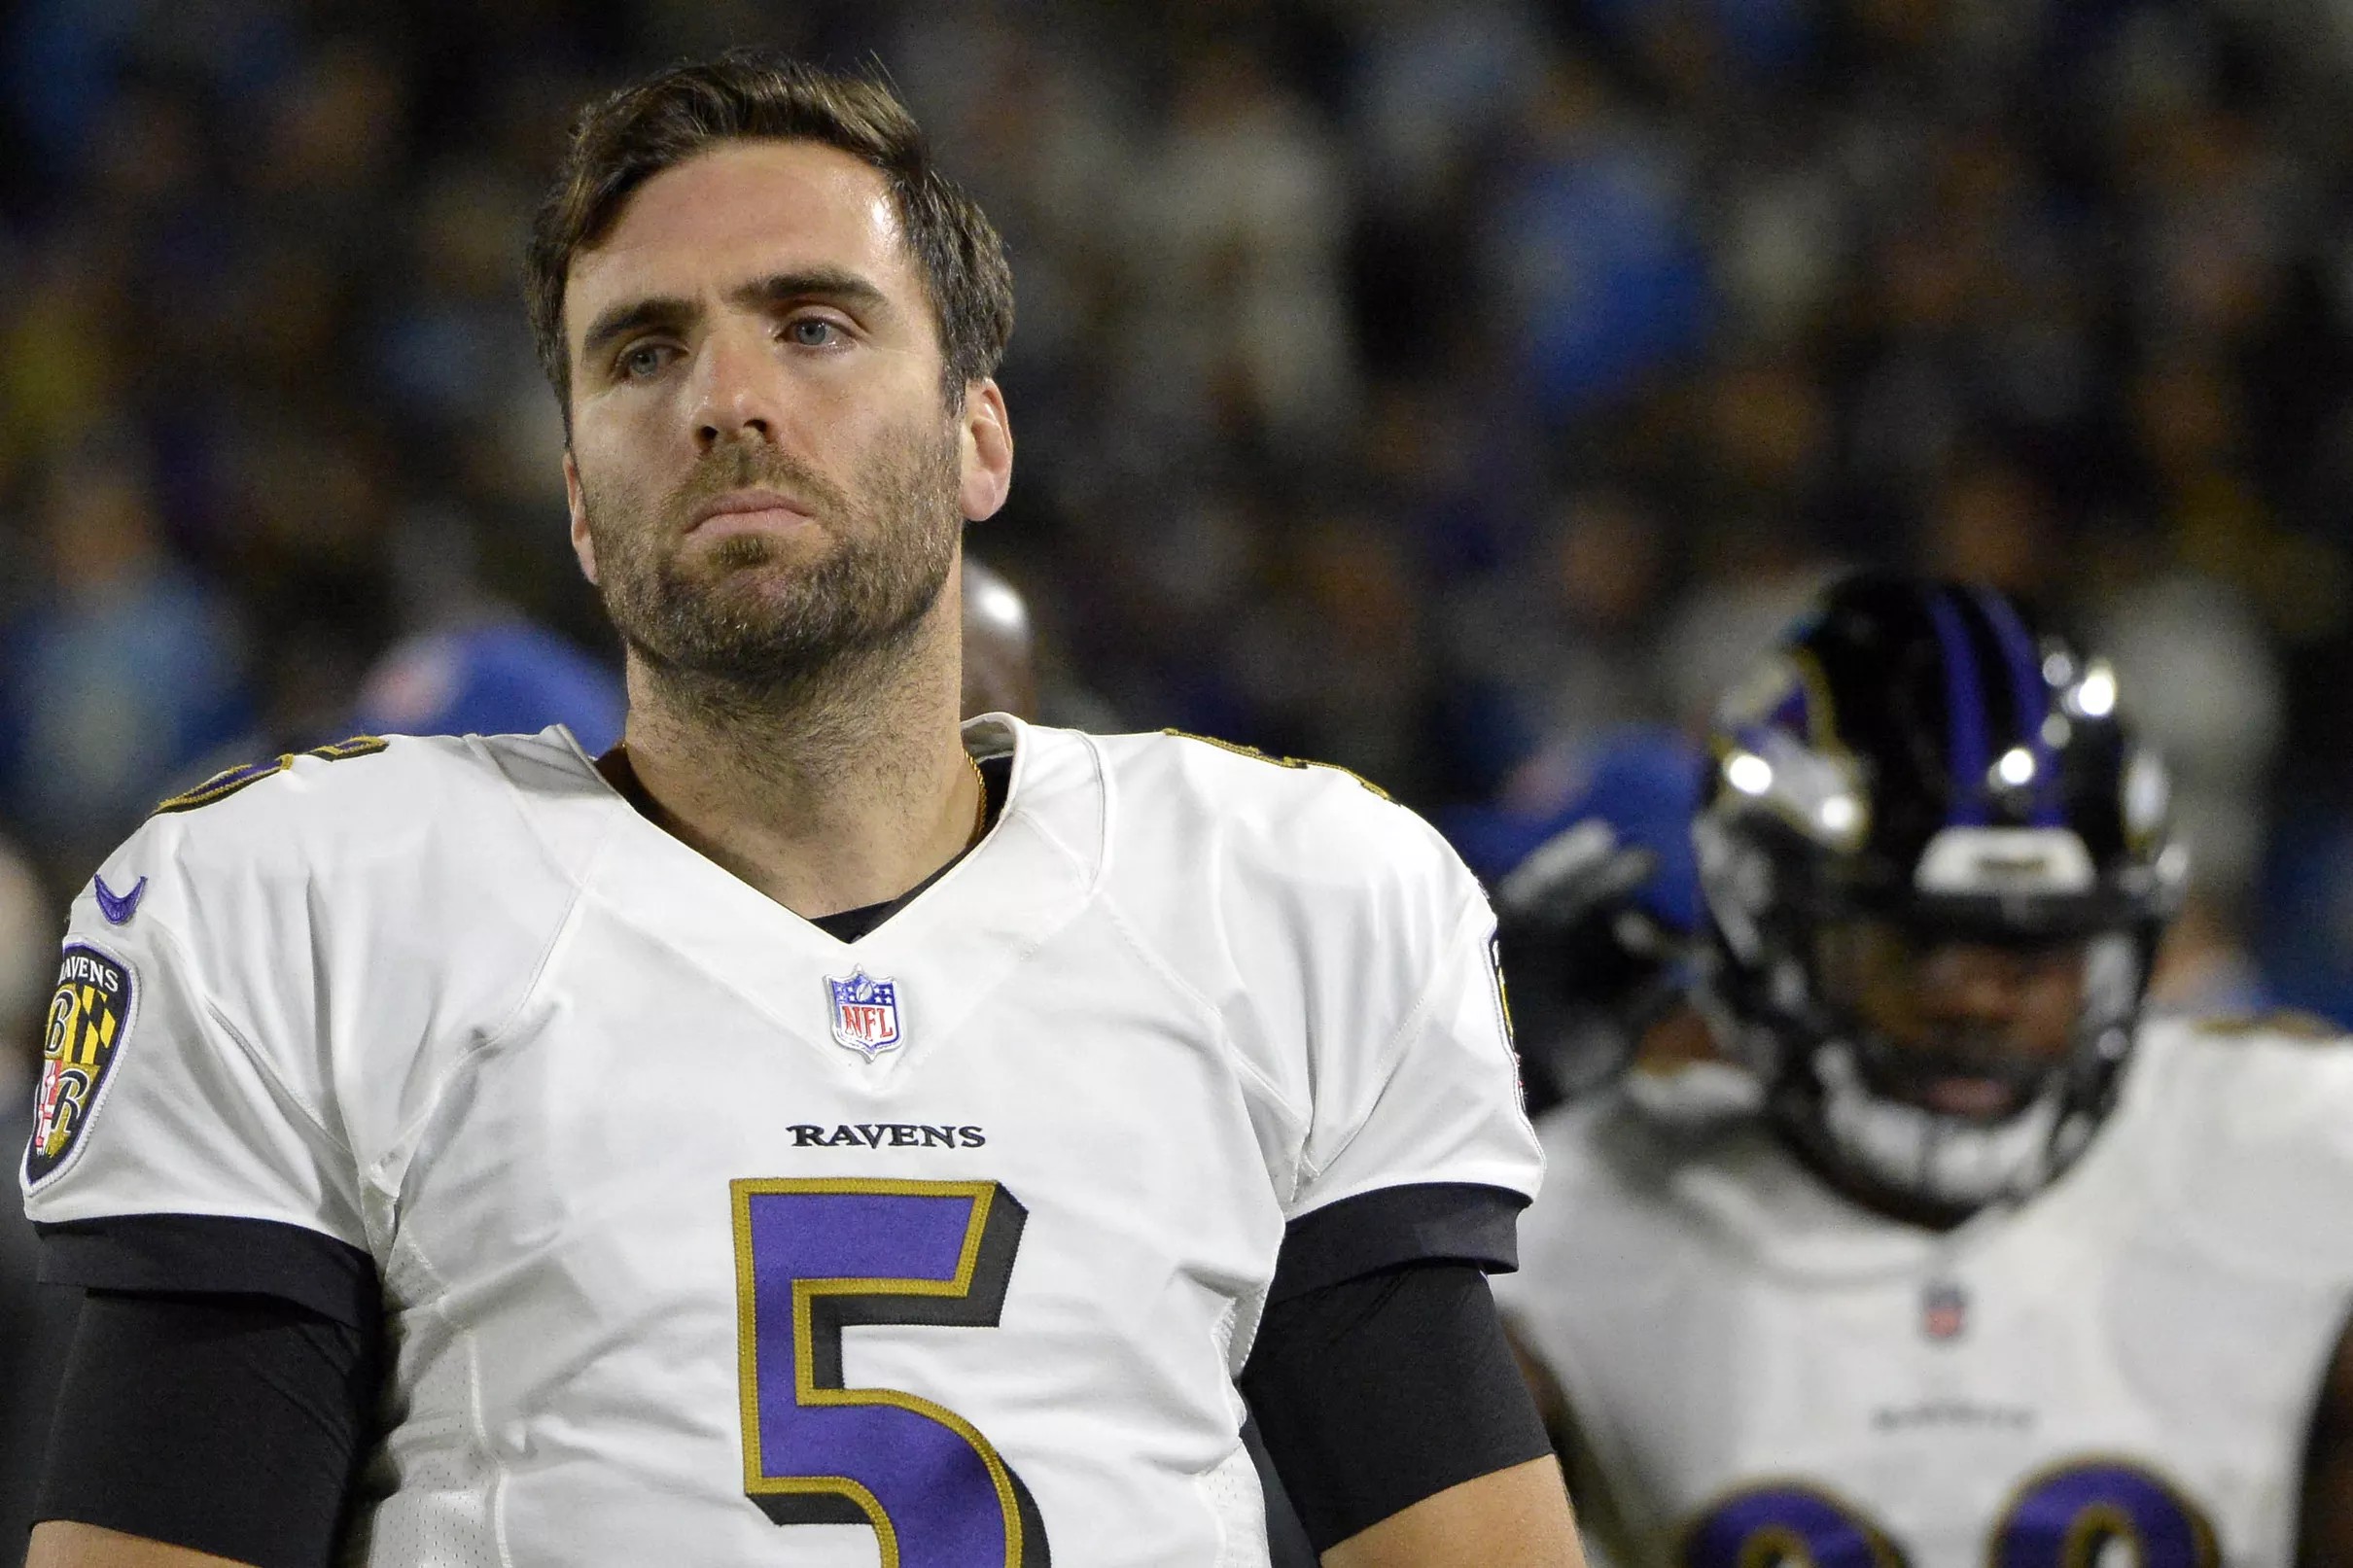 Joe Flacco to Denver — does that put Case Keenum in play for Giants?